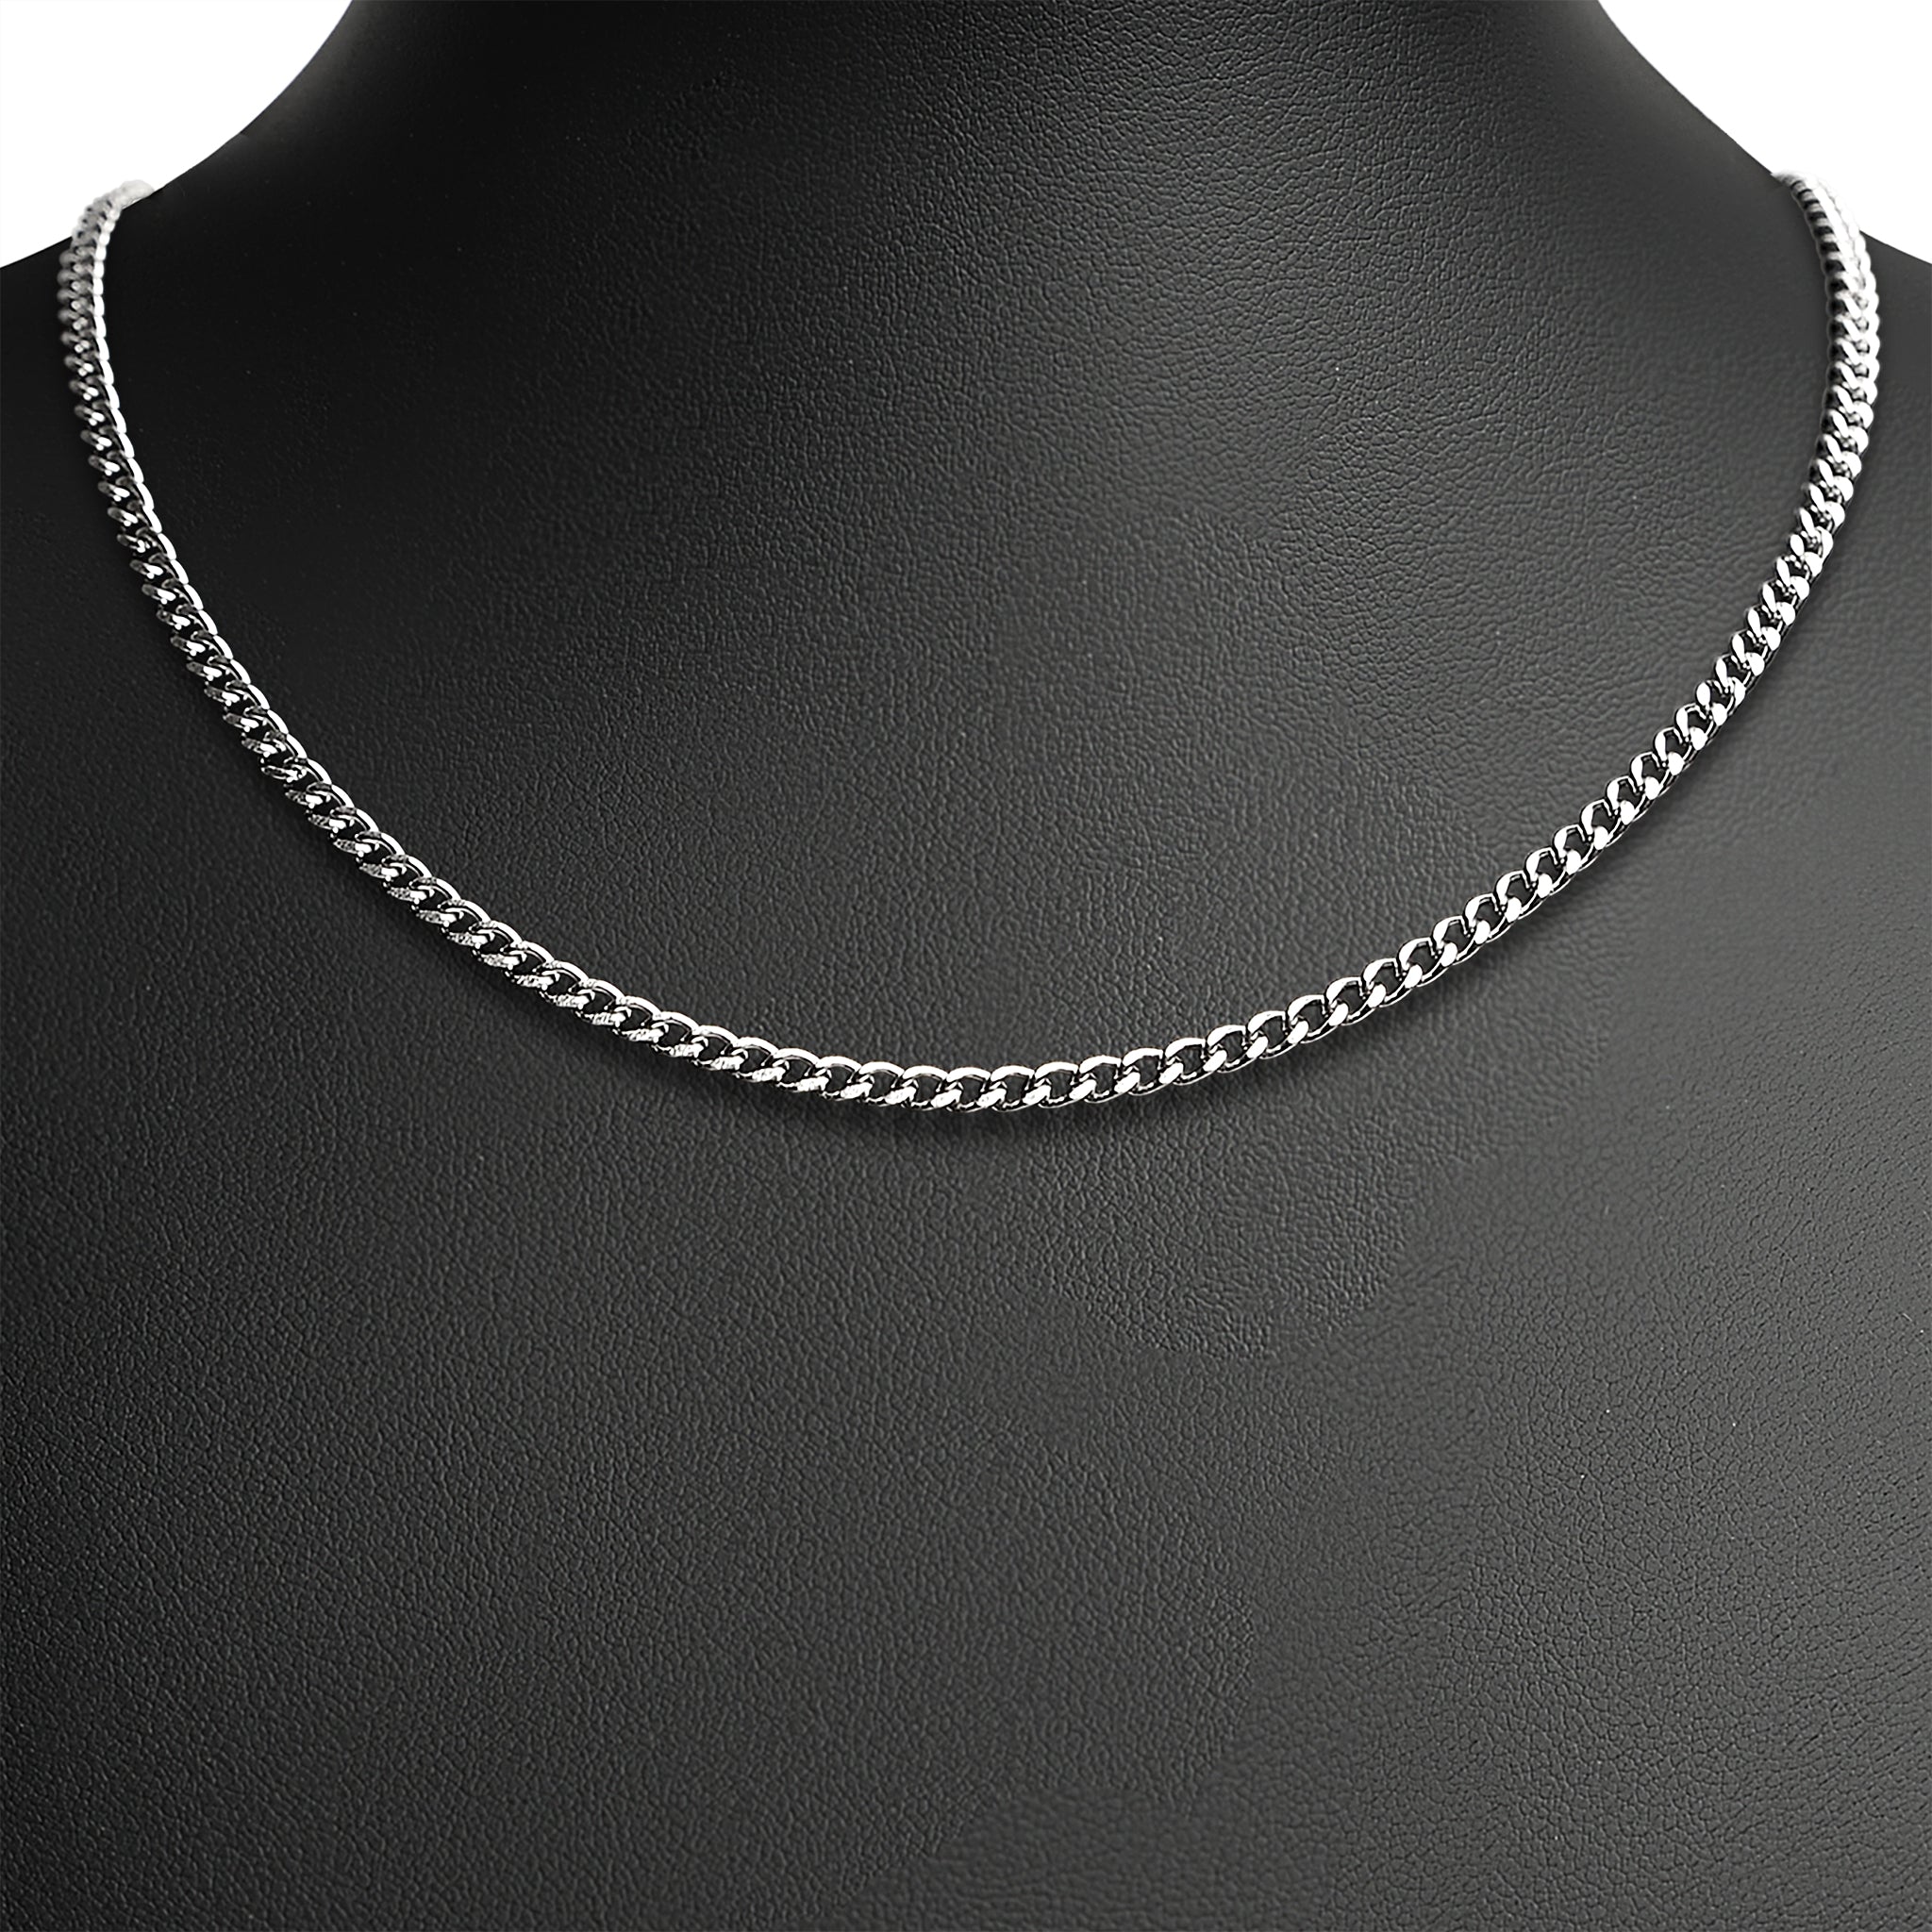 10 X Stainless Steel Curb Link Necklace, Beveled Flat Curb Chain